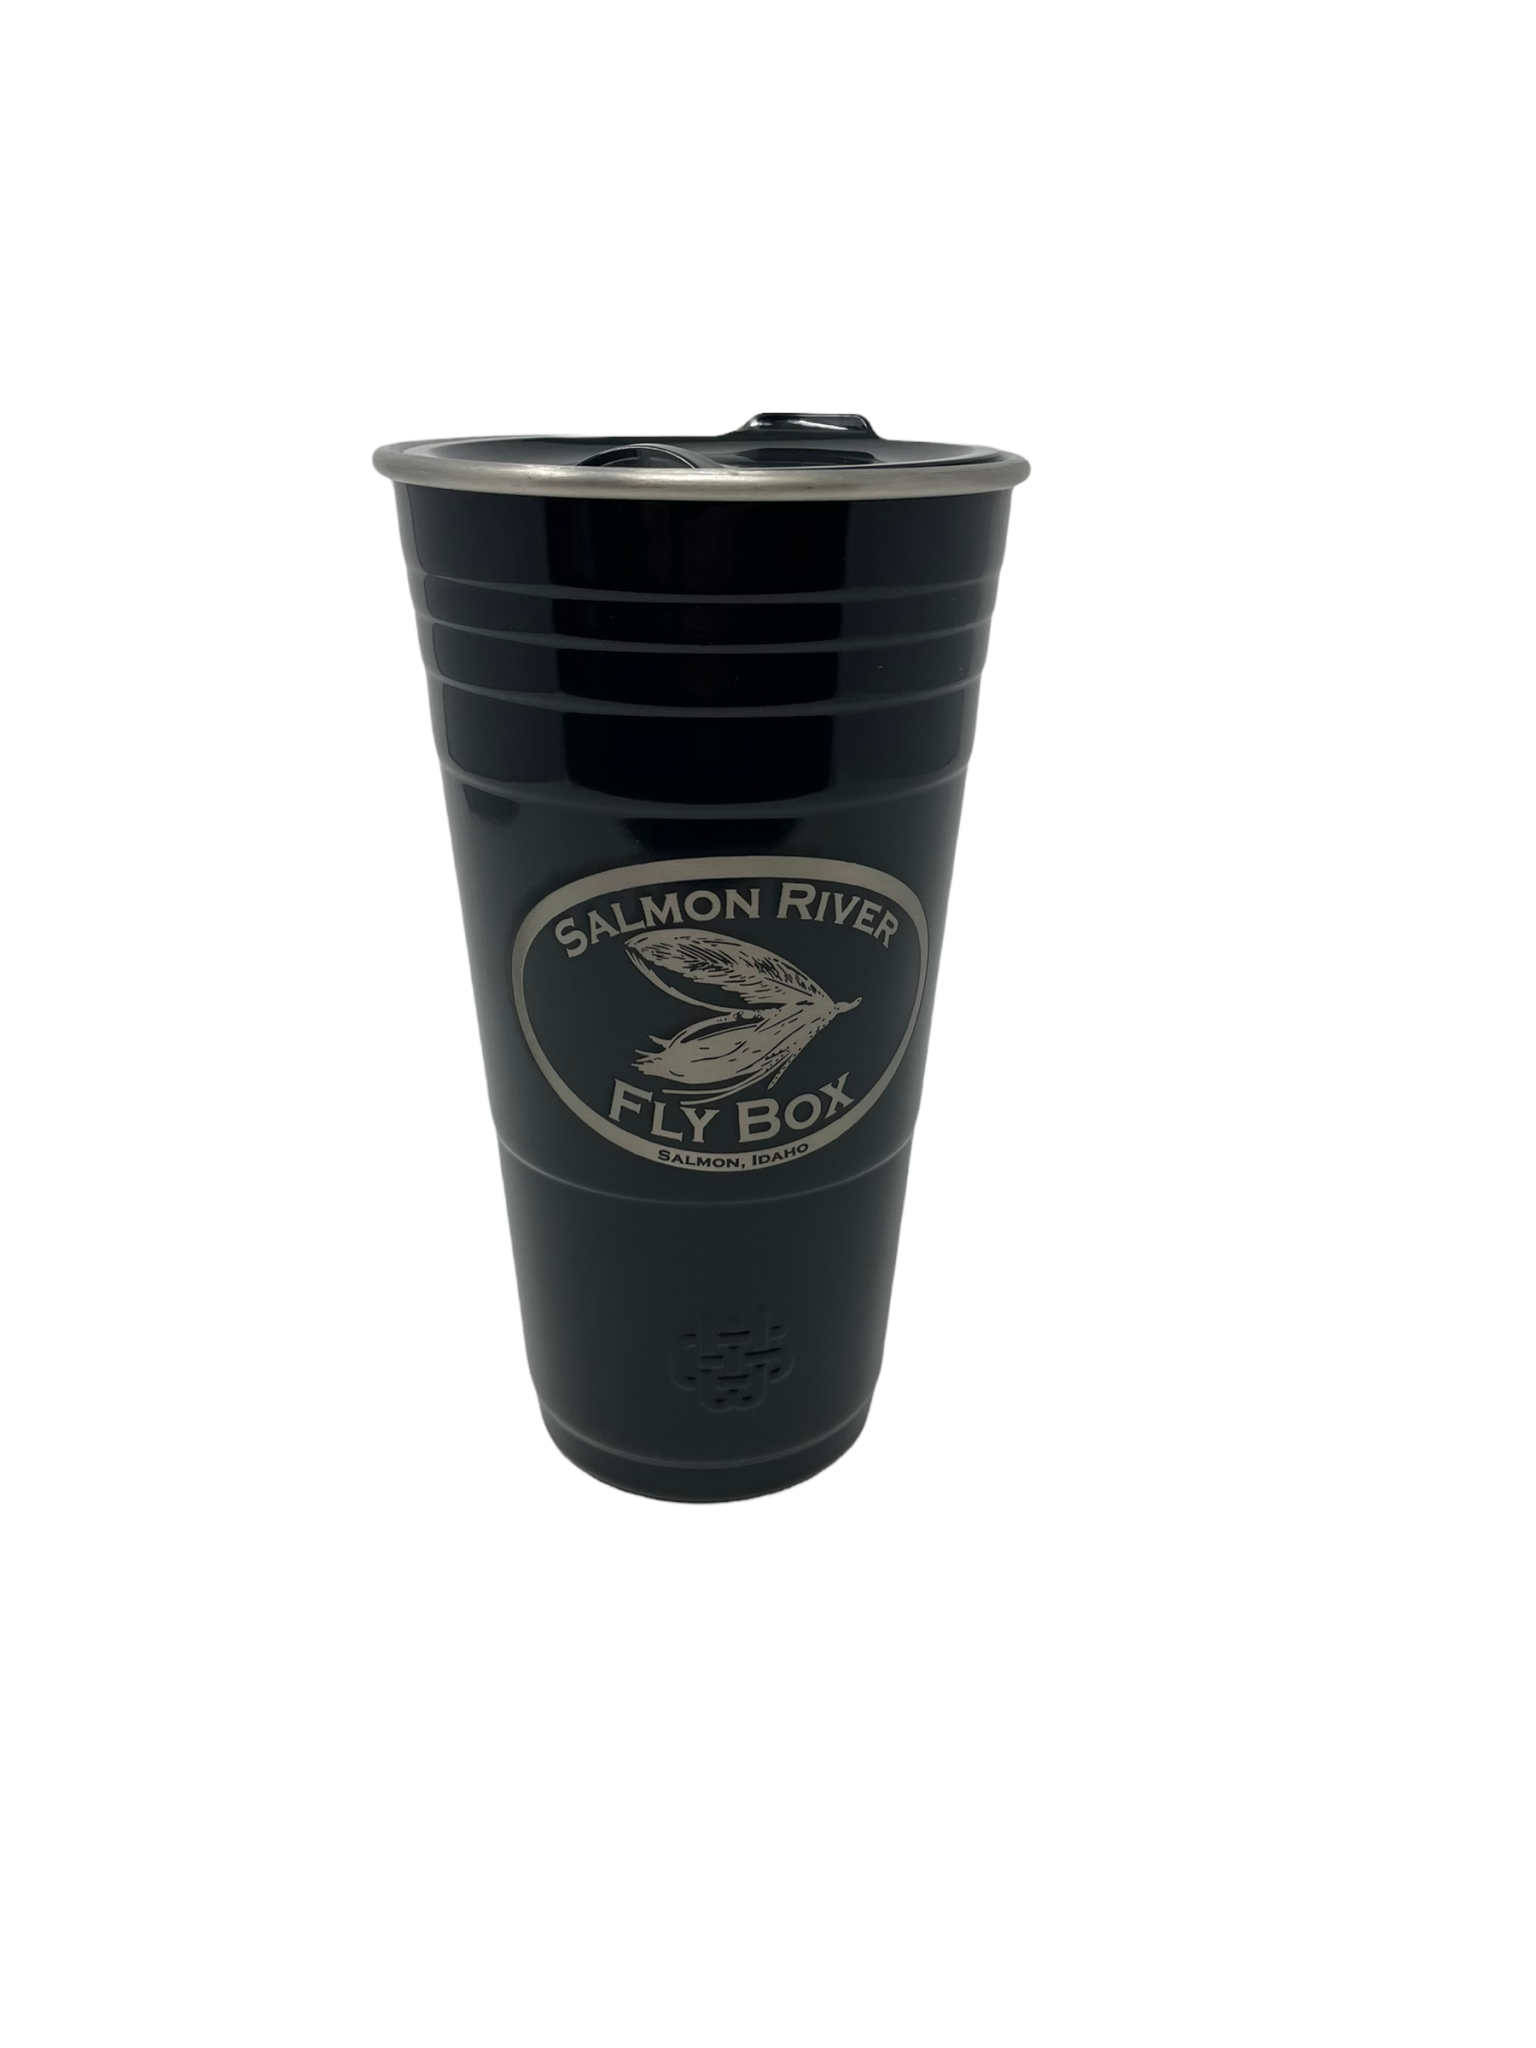 The Wyld Cup™ 24oz Stainless Steel Party Cup Tumbler - Wyld Gear